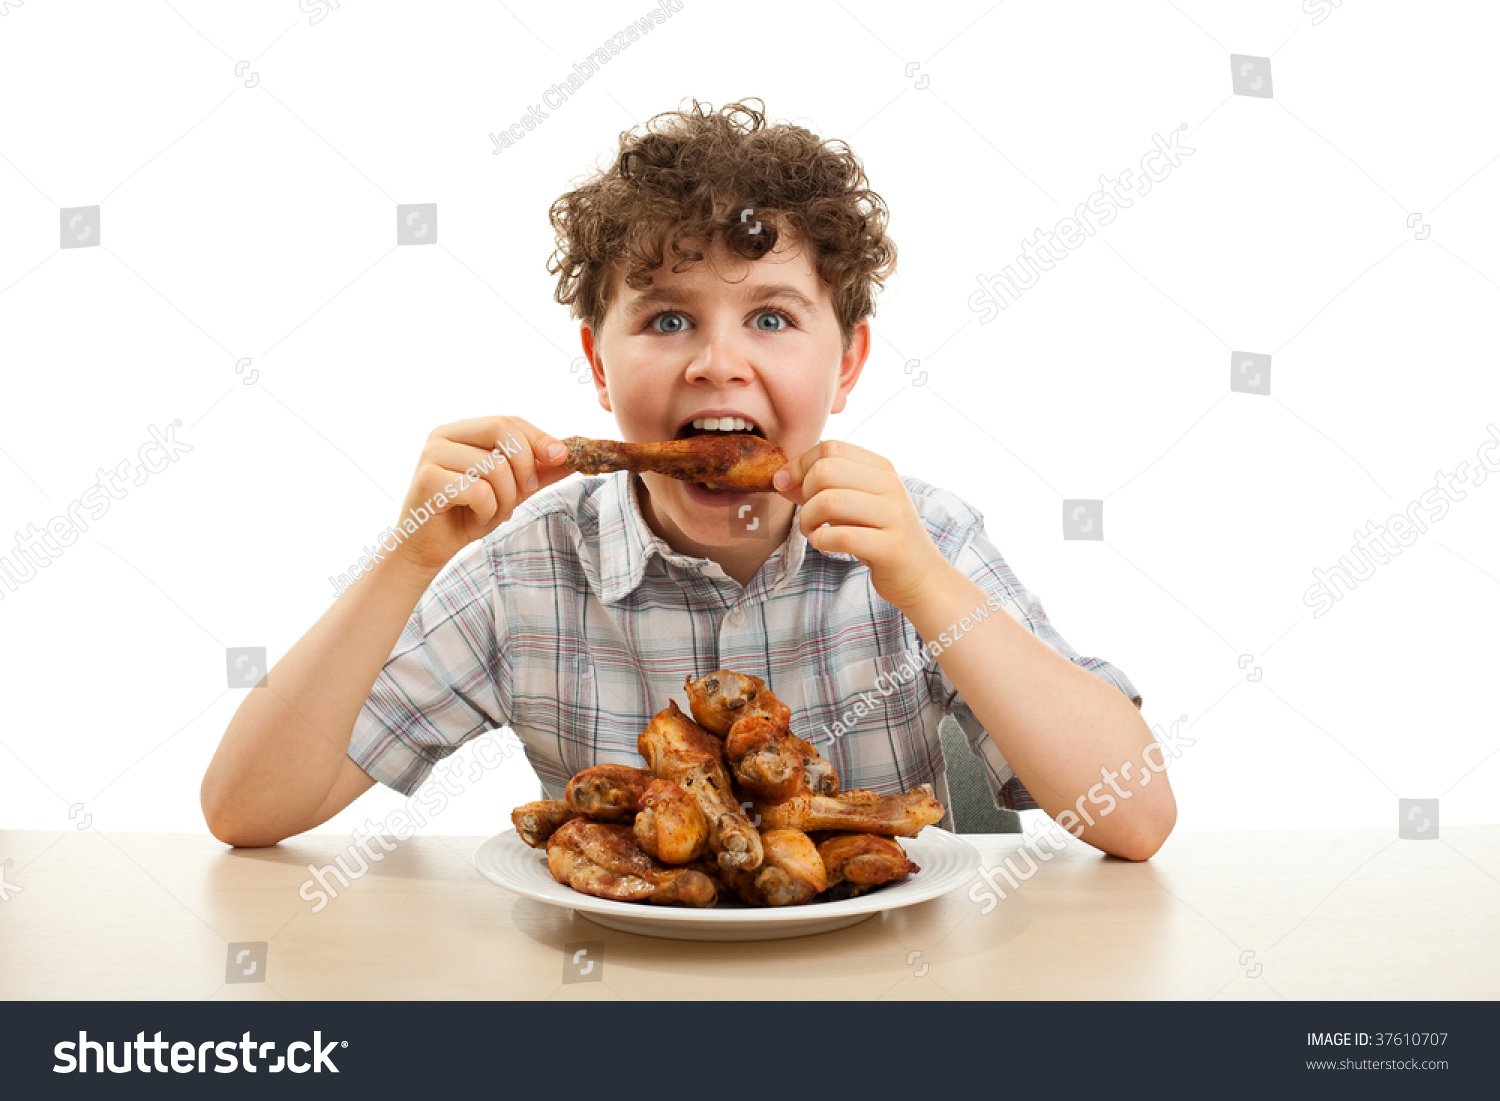 stock-photo-kid-eating-chicken-drumsticks-isolated-on-white-37610707.jpg